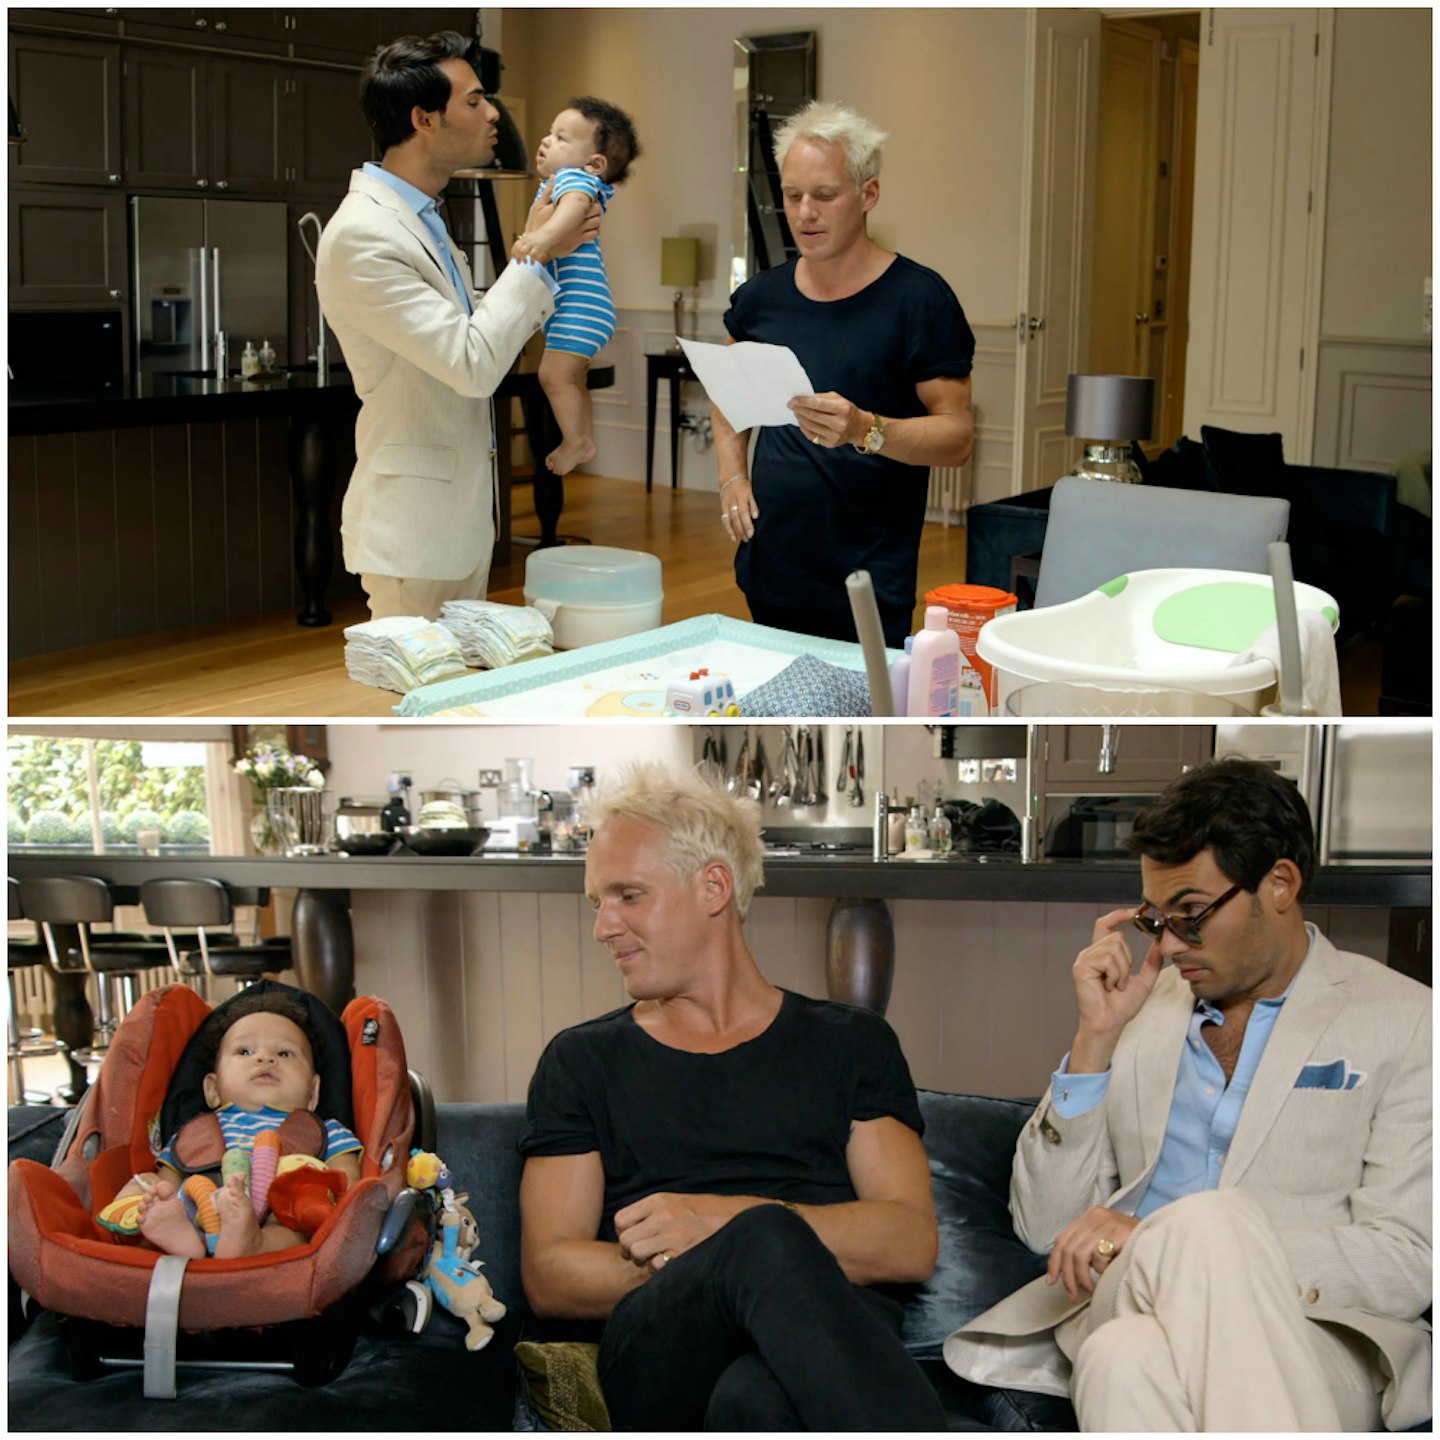 made-in-chelsea-jamie-laing-mark-francis-vandelli-parenting-for-Idiots-channel-4